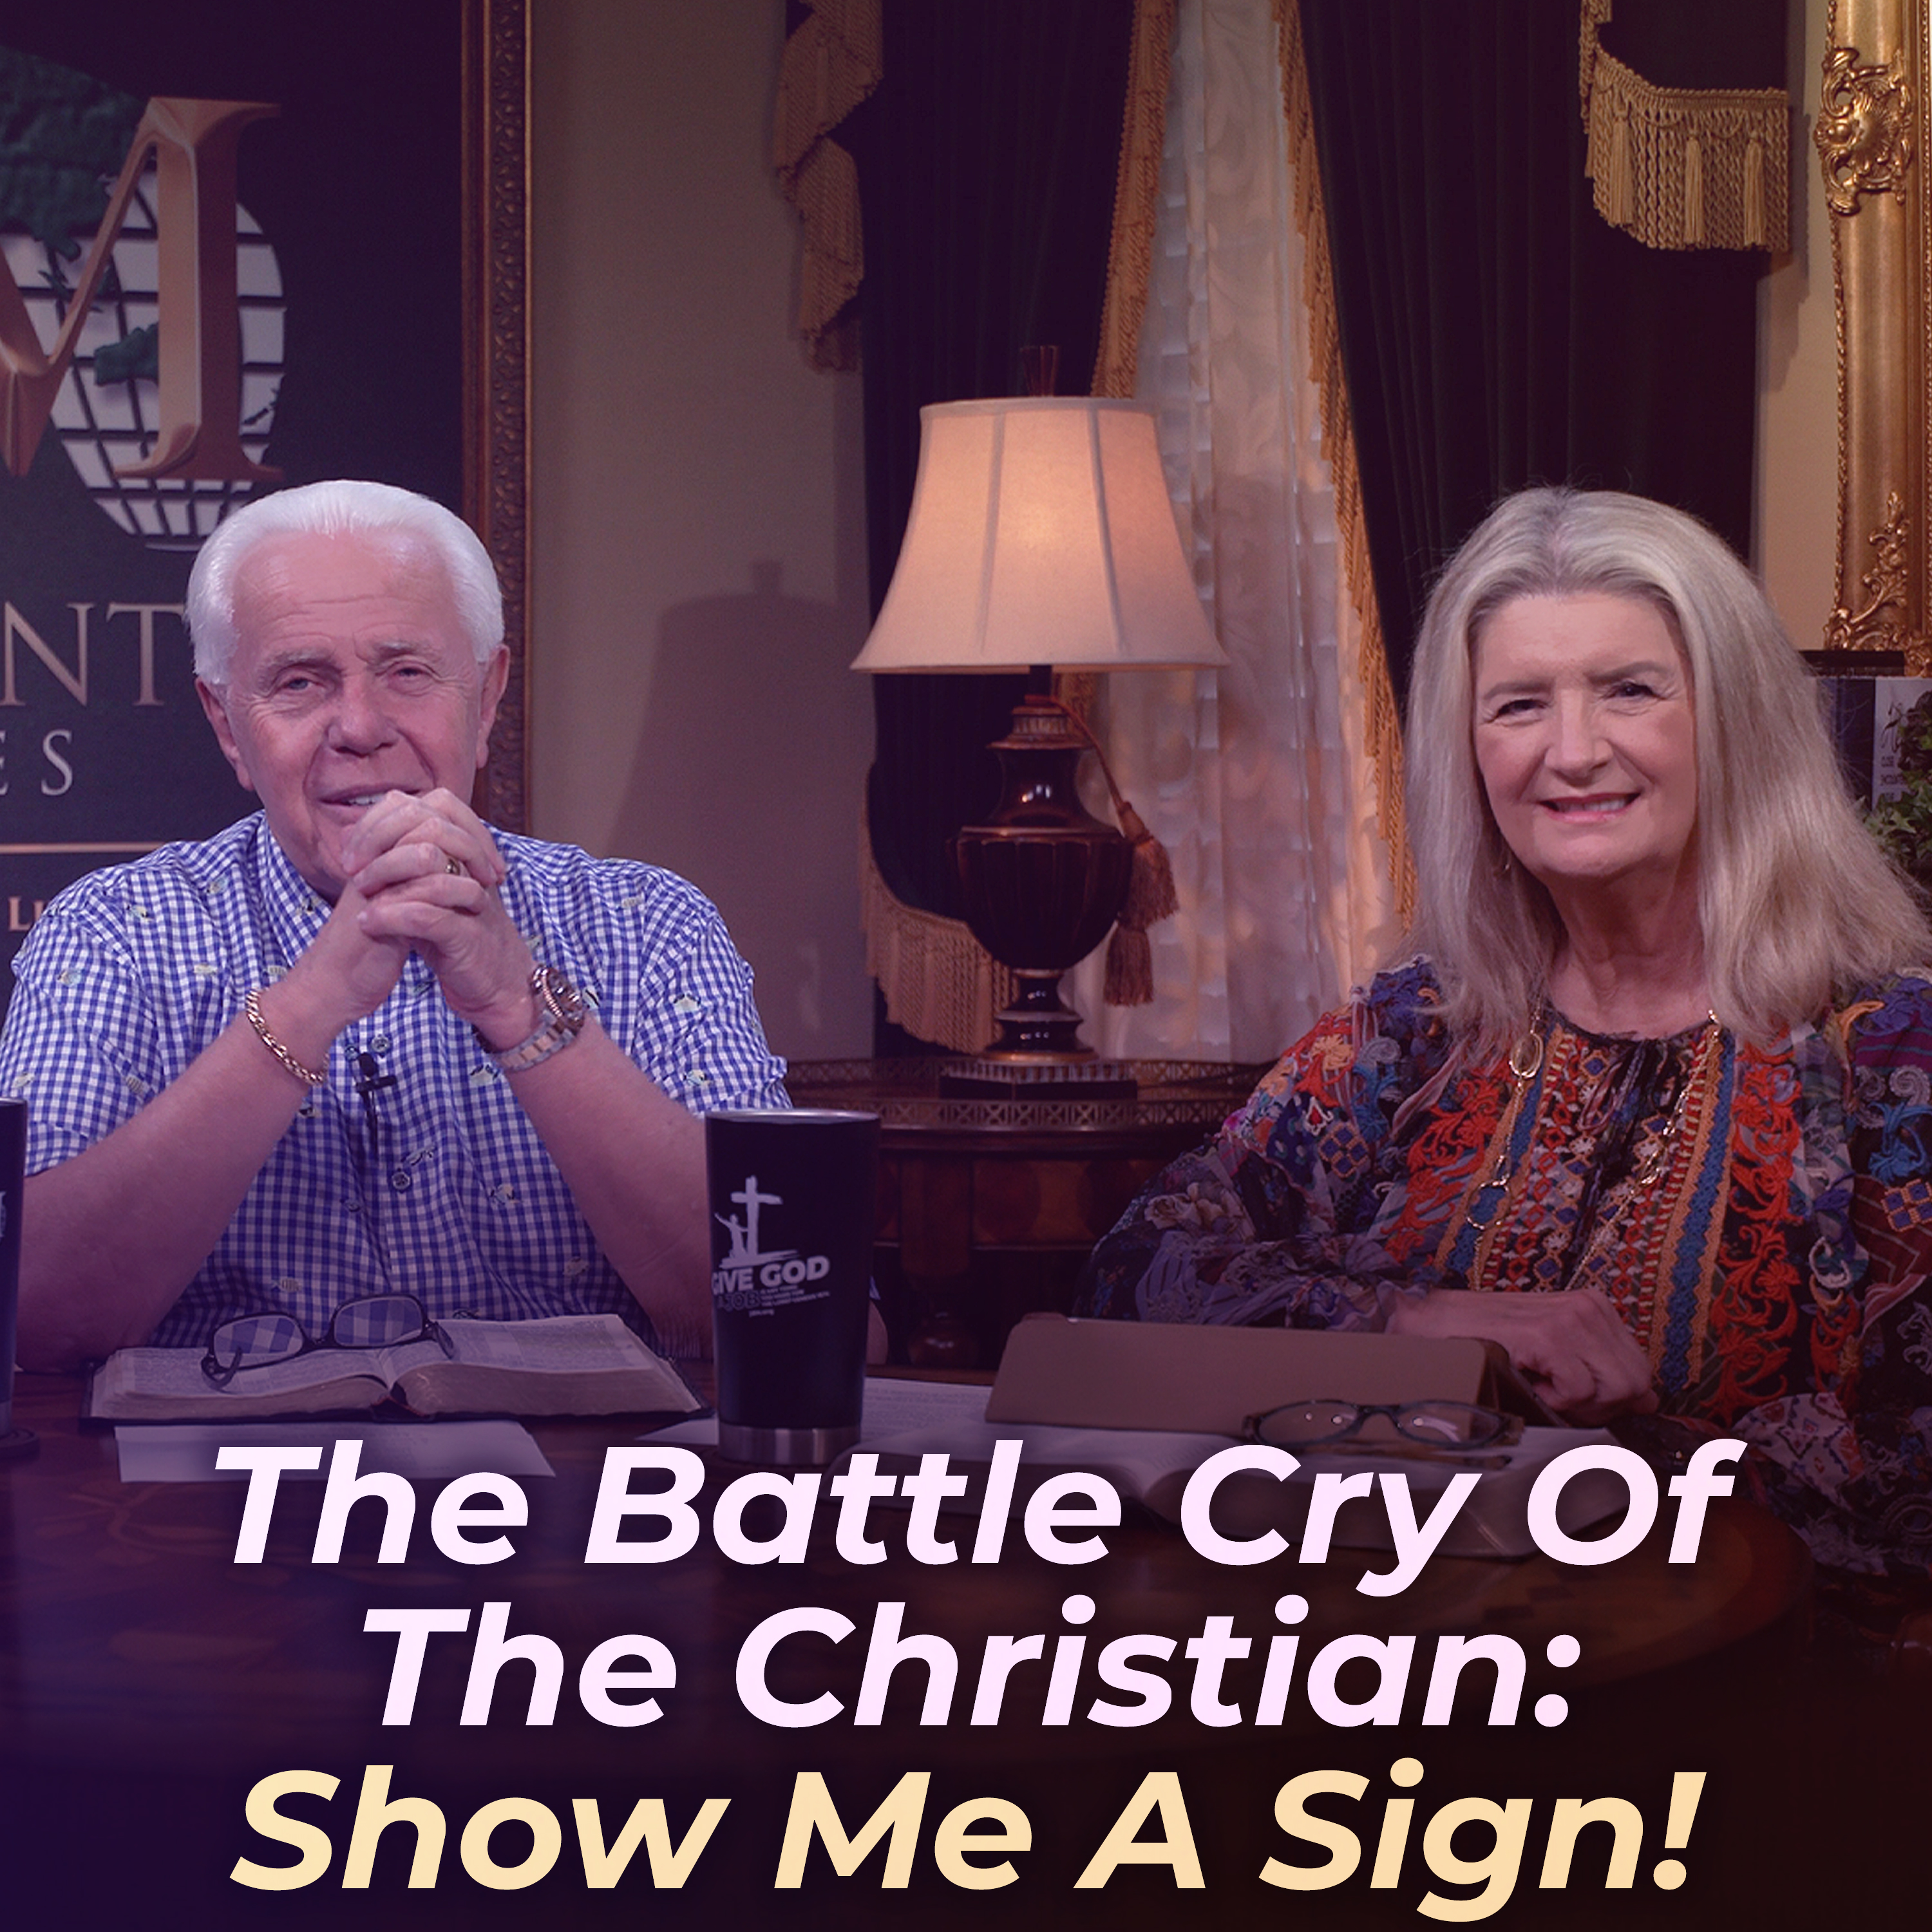 The Battle Cry Of The Christian: Show Me A Sign!